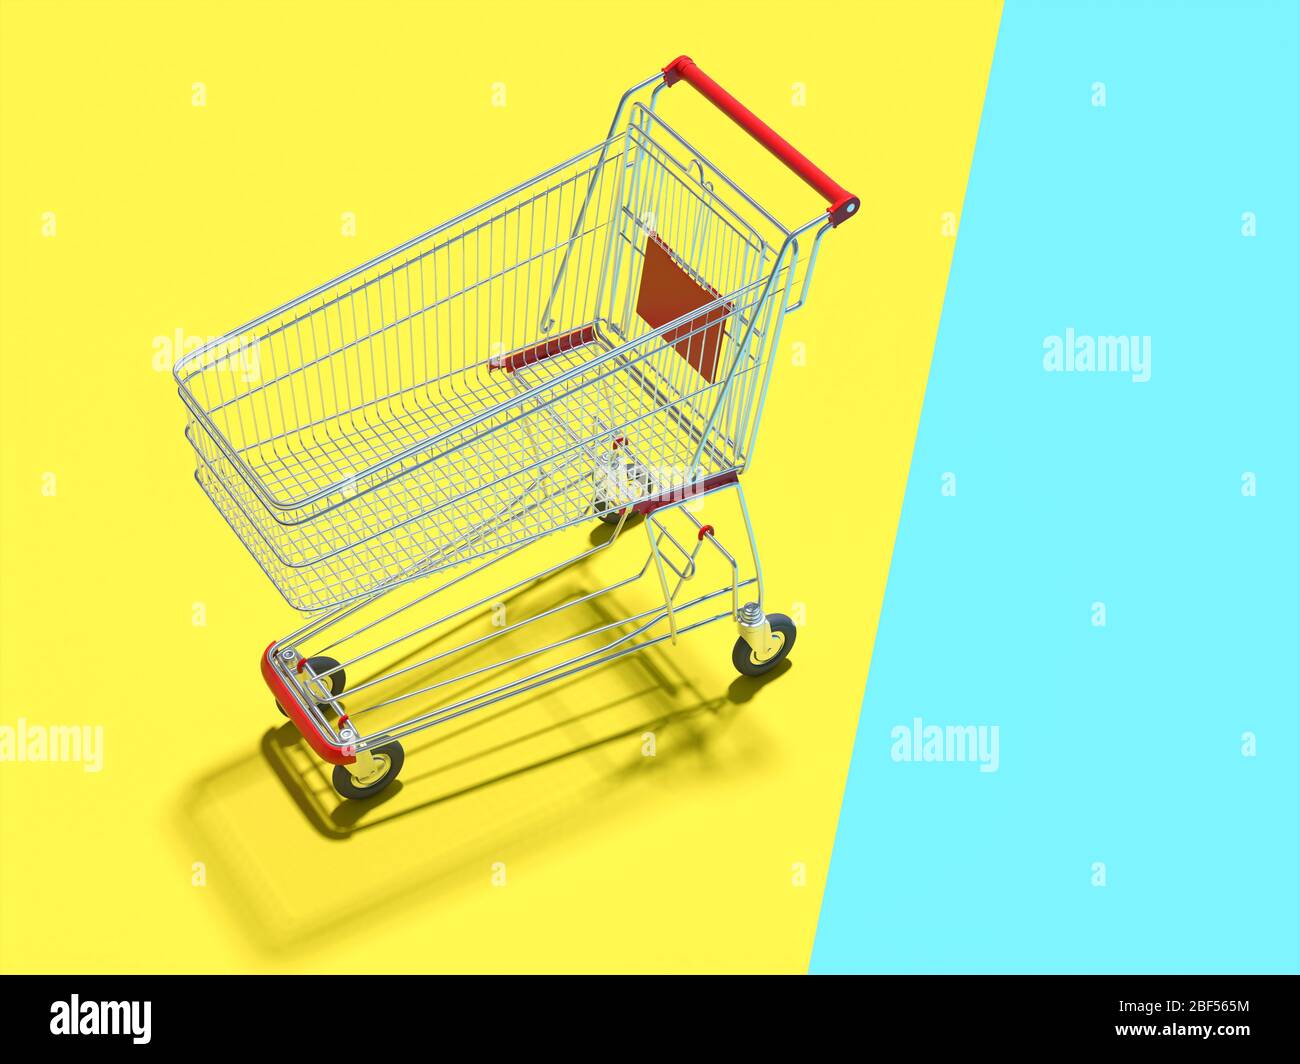 shopping cart on light blue and yellow background, minimalistic 3d image. shopping and shopping concept. Stock Photo